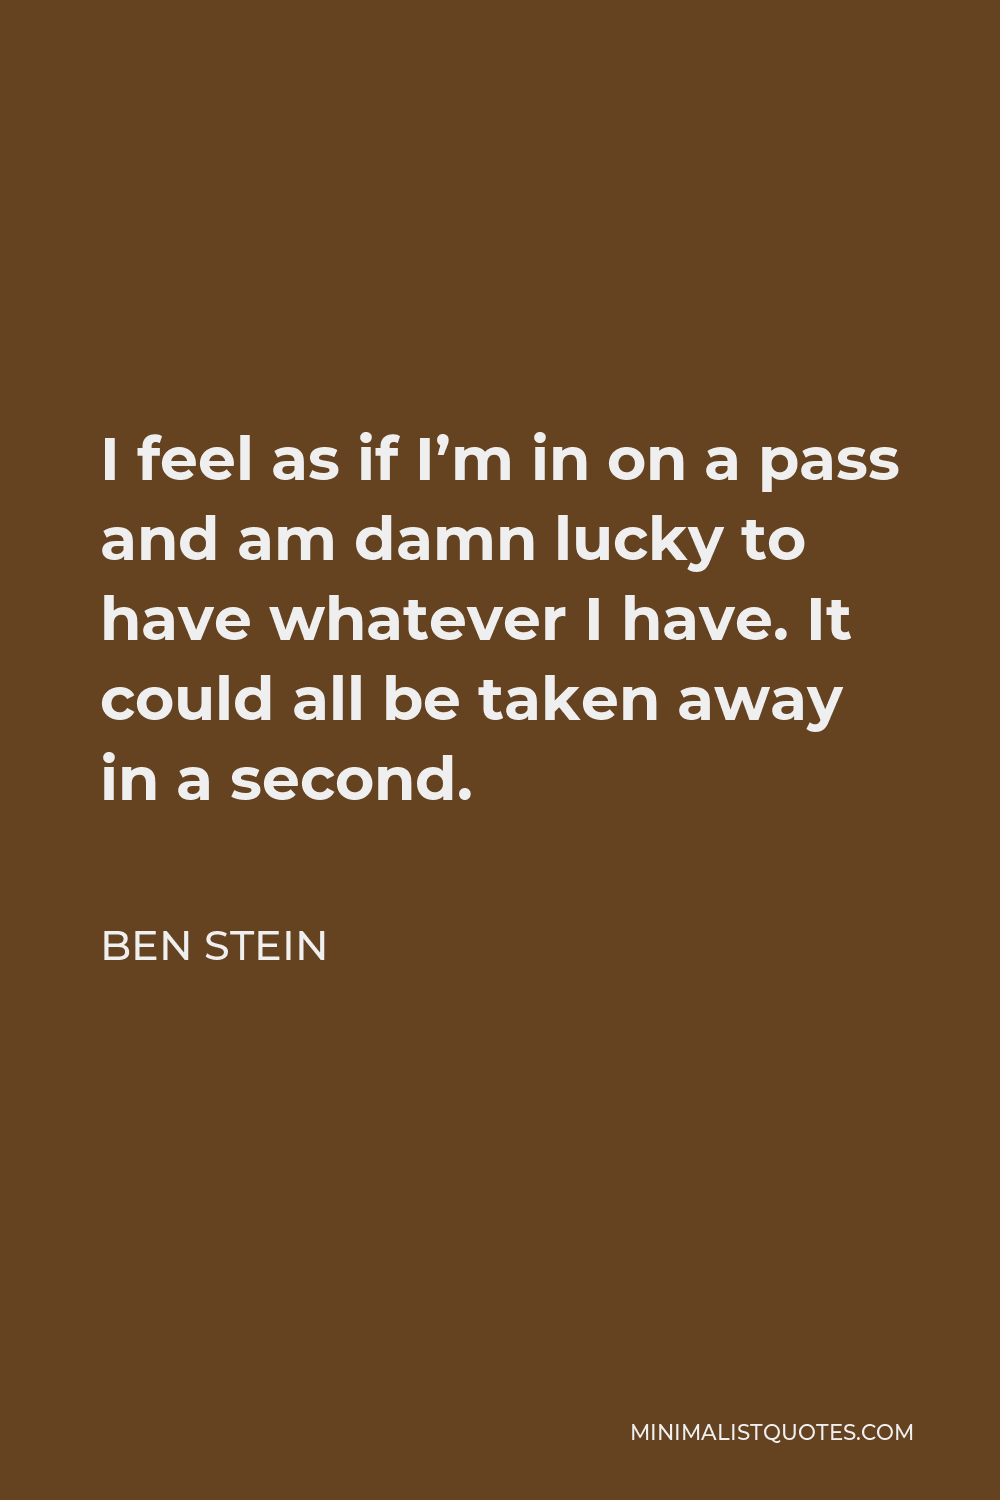 Ben Stein Quote - I feel as if I’m in on a pass and am damn lucky to have whatever I have. It could all be taken away in a second.